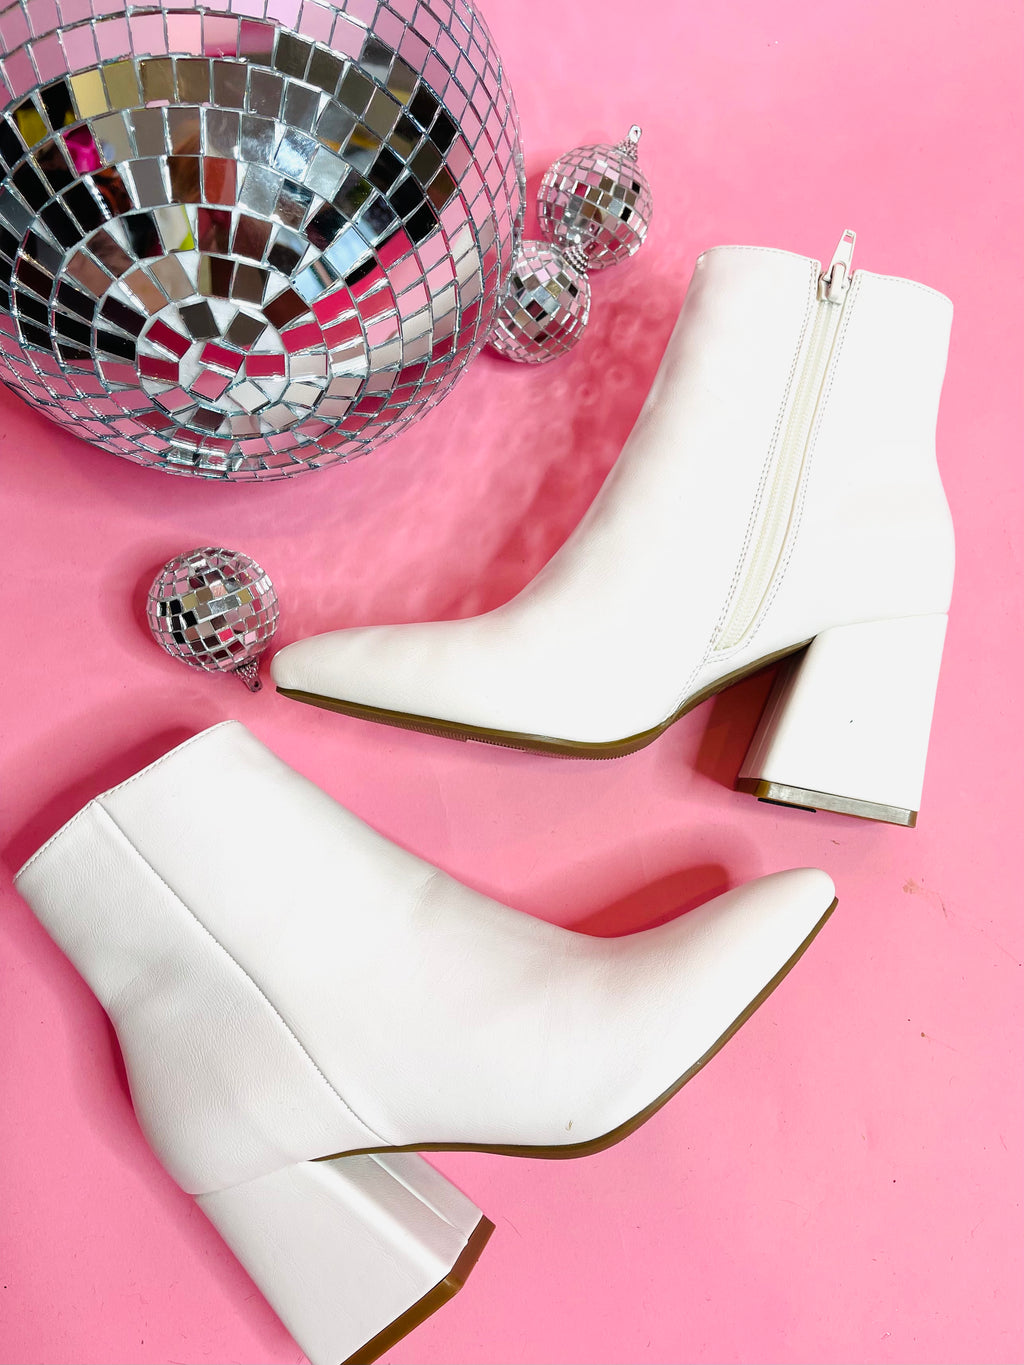 Booties feature a plain white base, block heel, full zip up detailing and runs true to size! 